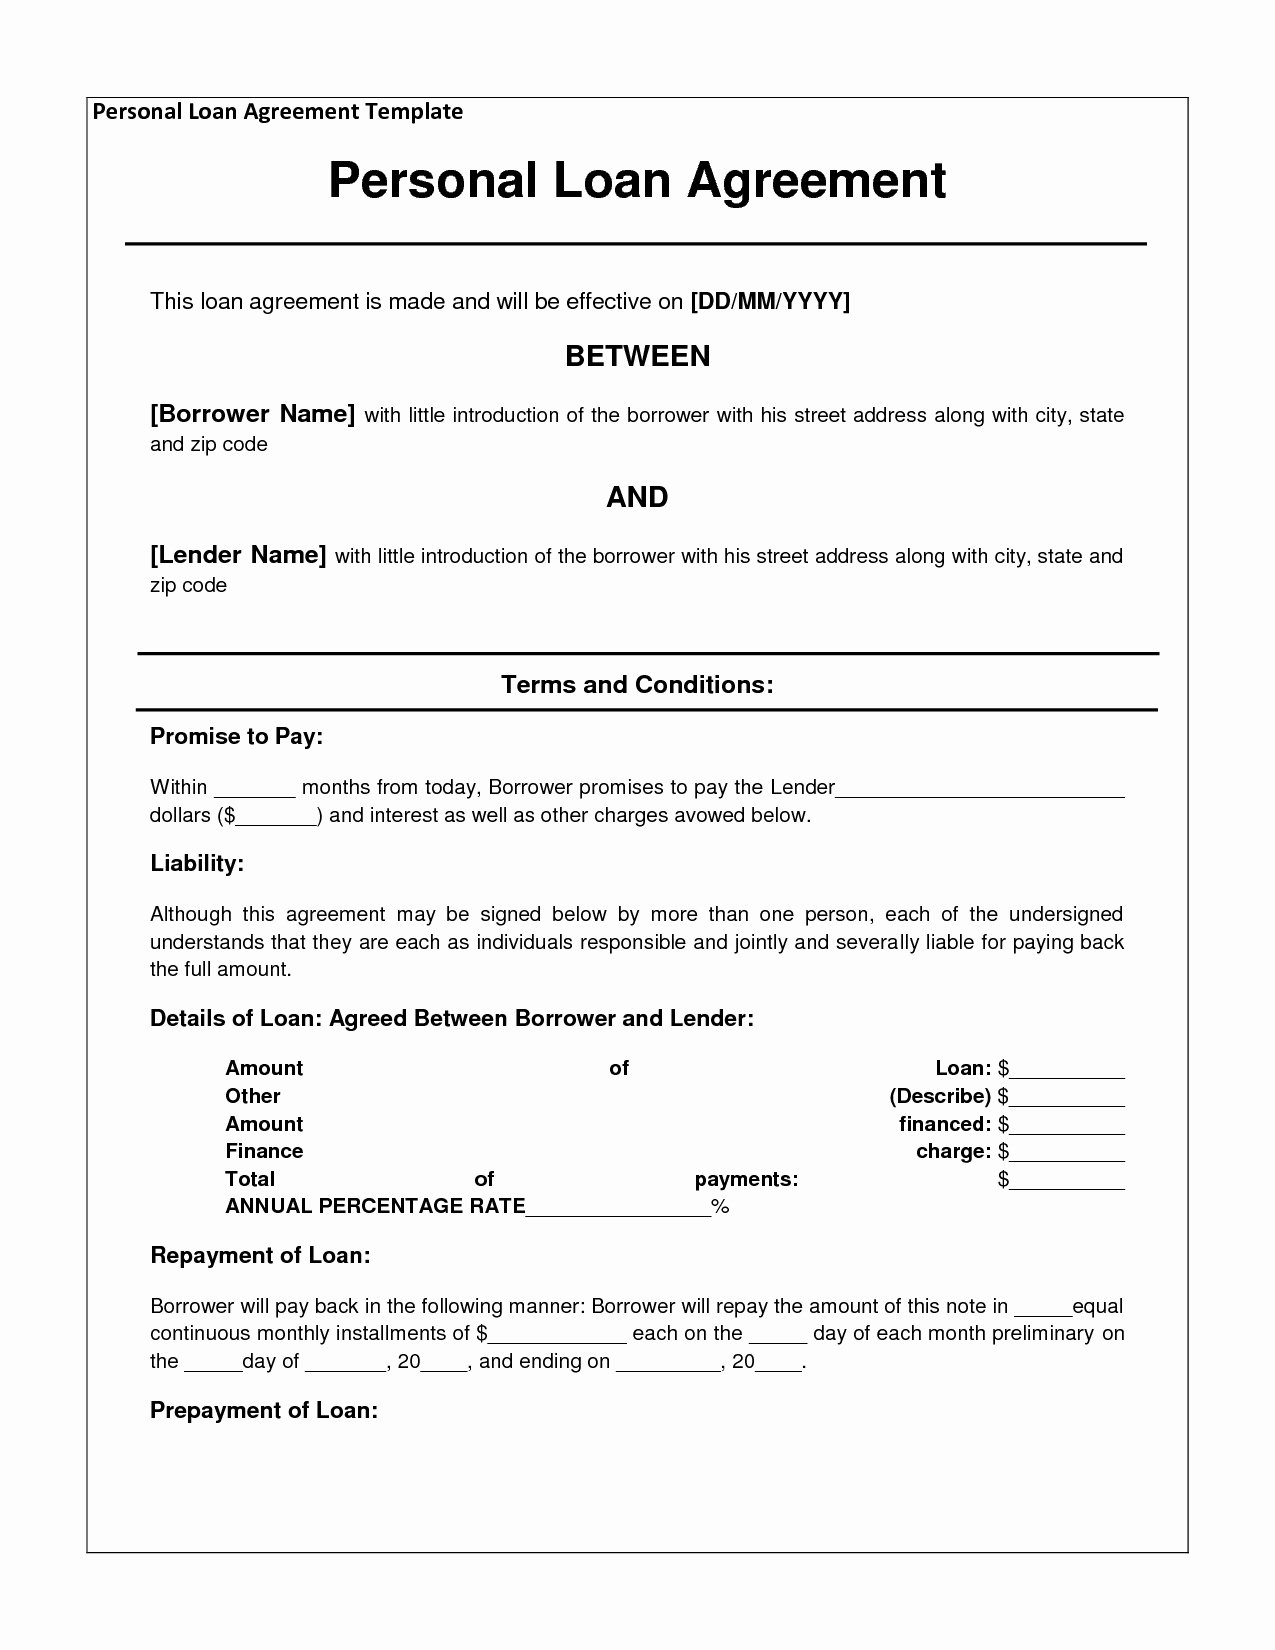 Personal Loan Documents Template Fresh Personal Loan Payoff Letter Template Samples